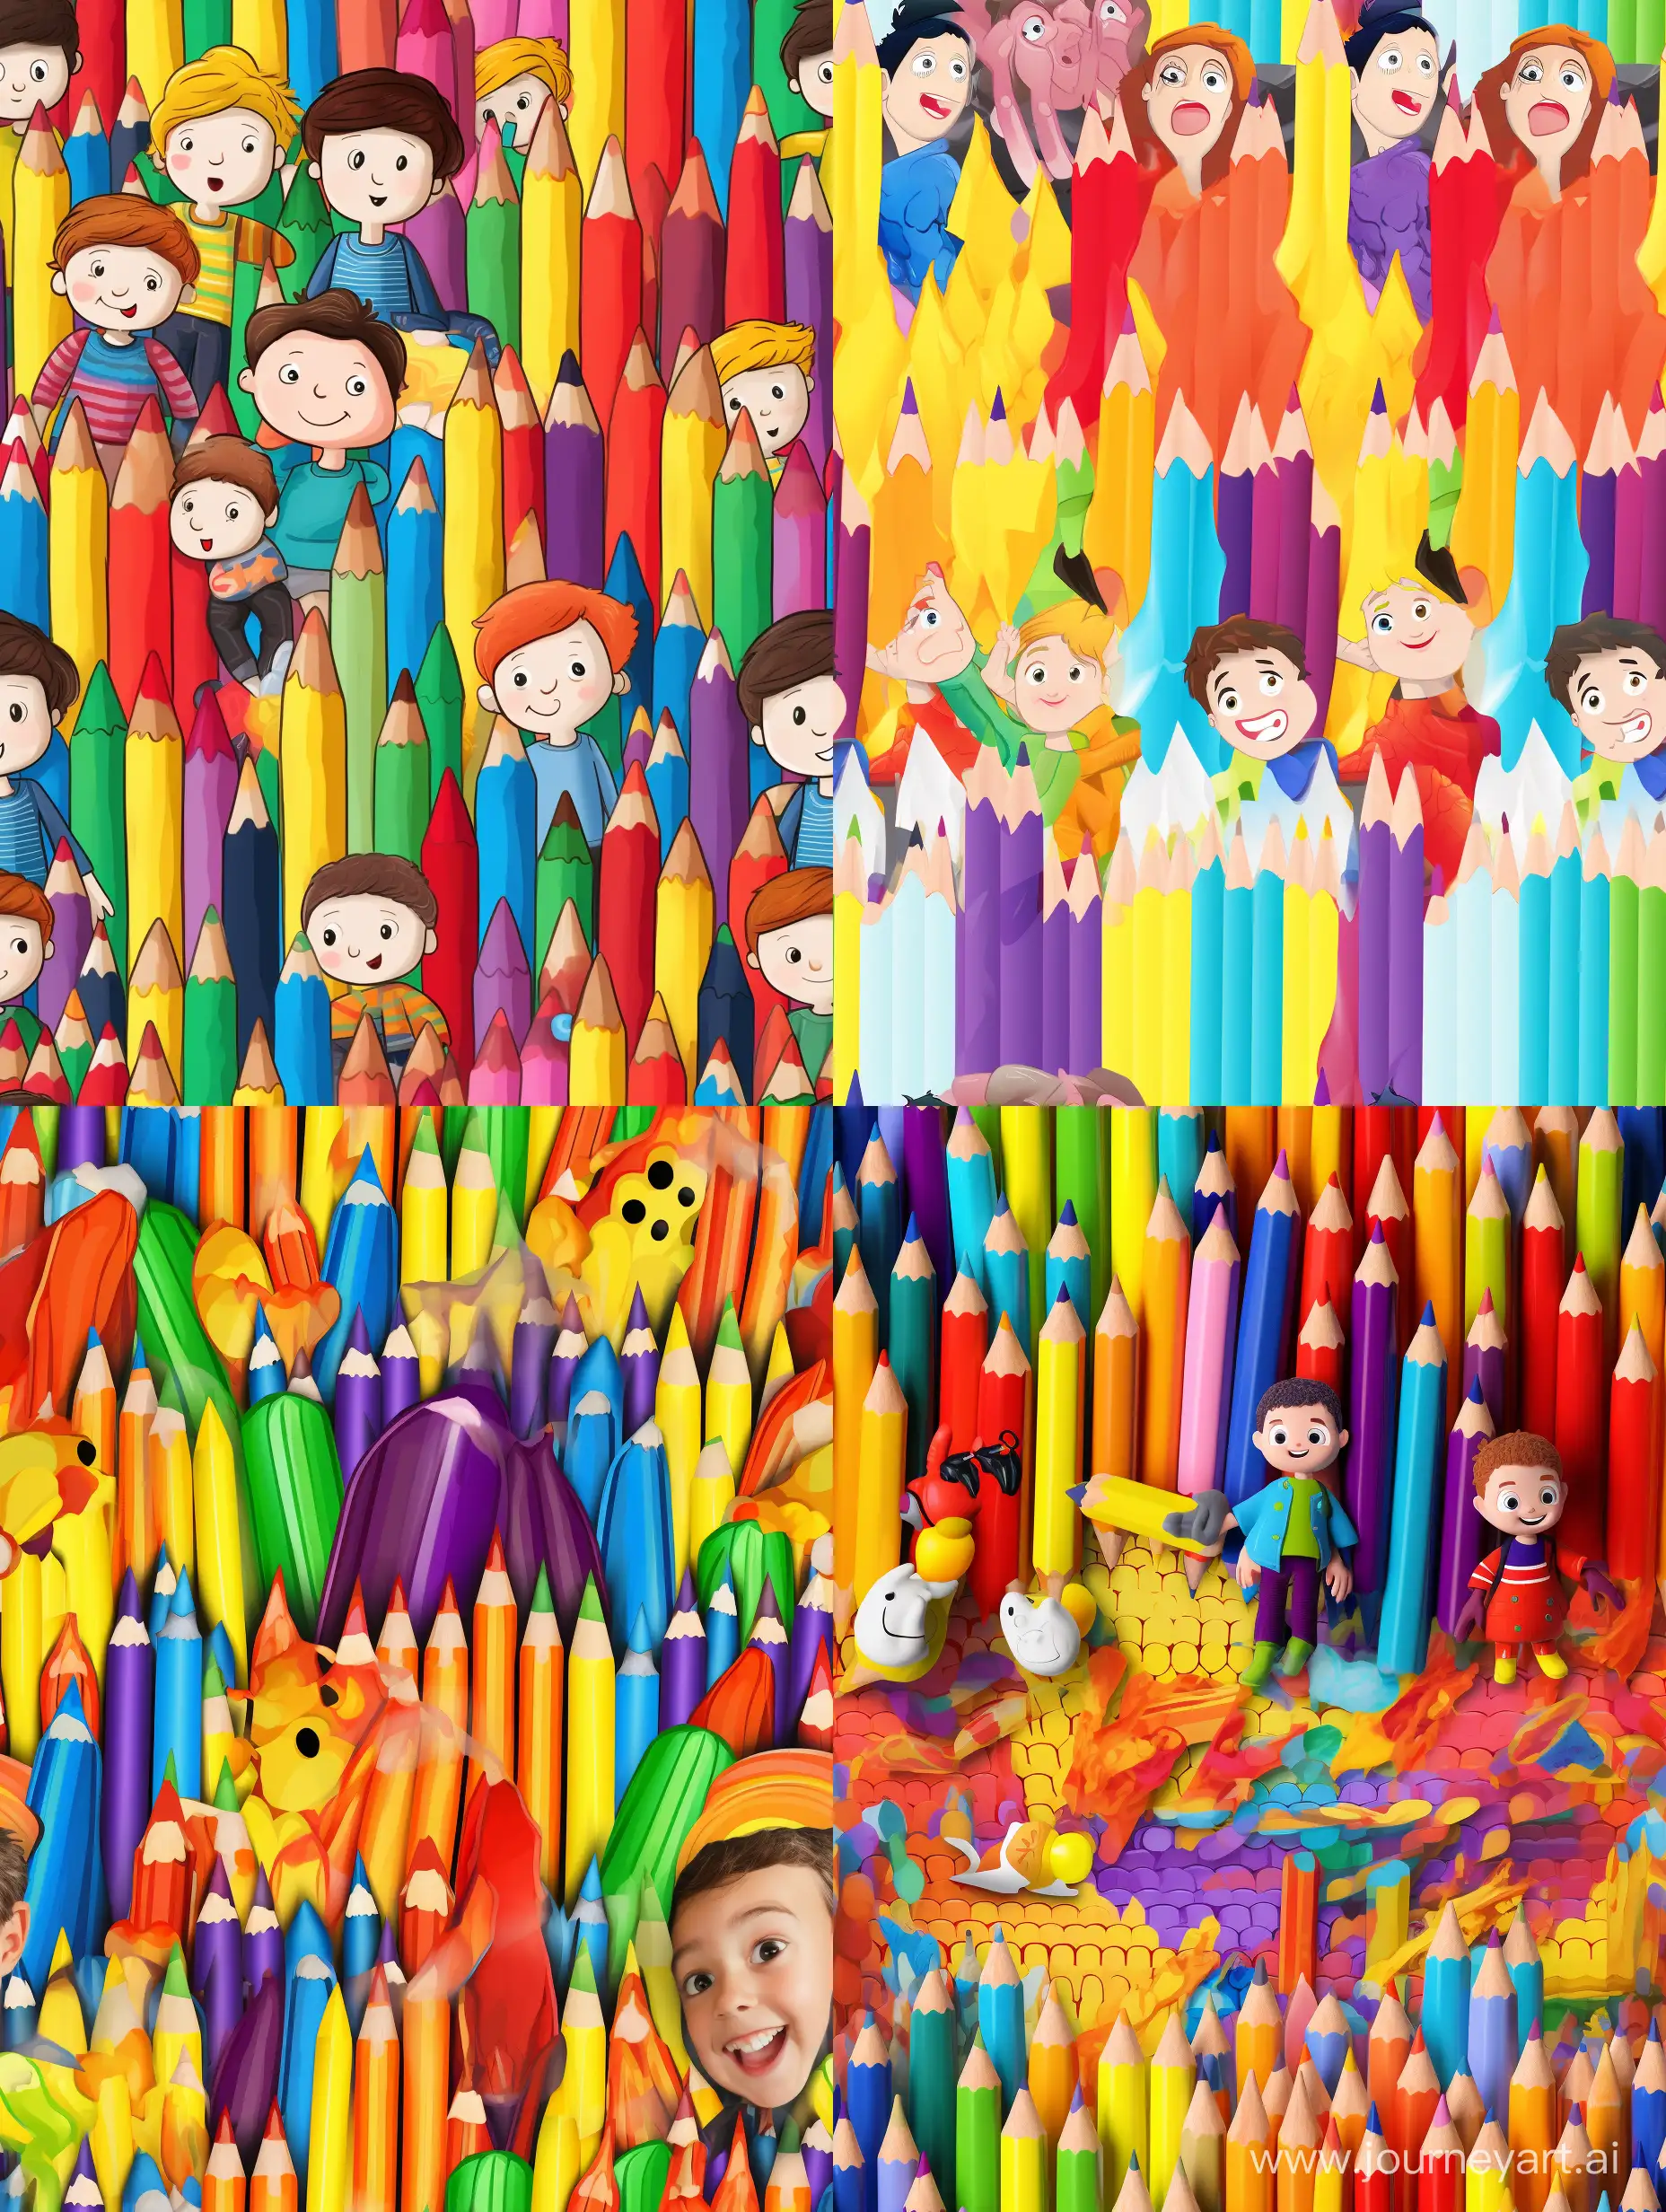 Playful-3D-Cartoon-Scene-Kids-Crafting-with-Vibrant-Crayons-in-a-Colorful-Spectrum